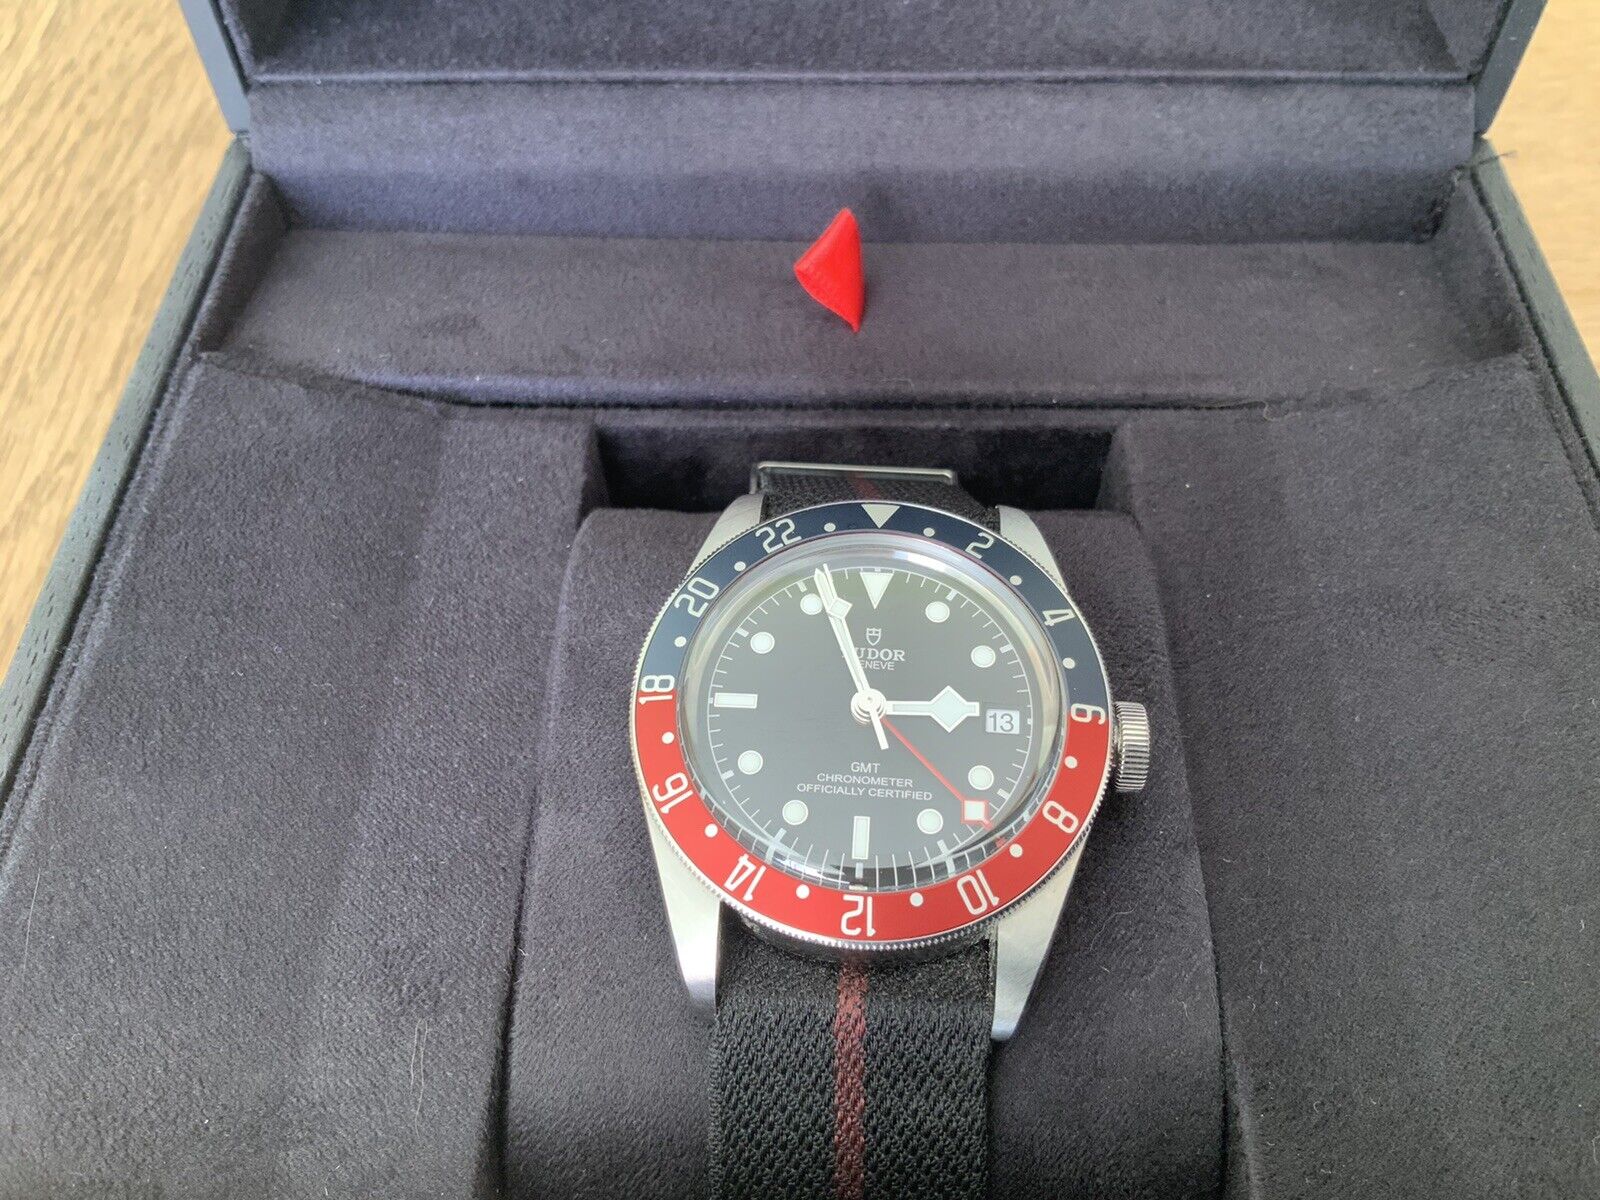 Click image for more details on this Tudor Black Bay Divers Watch - eBay UK